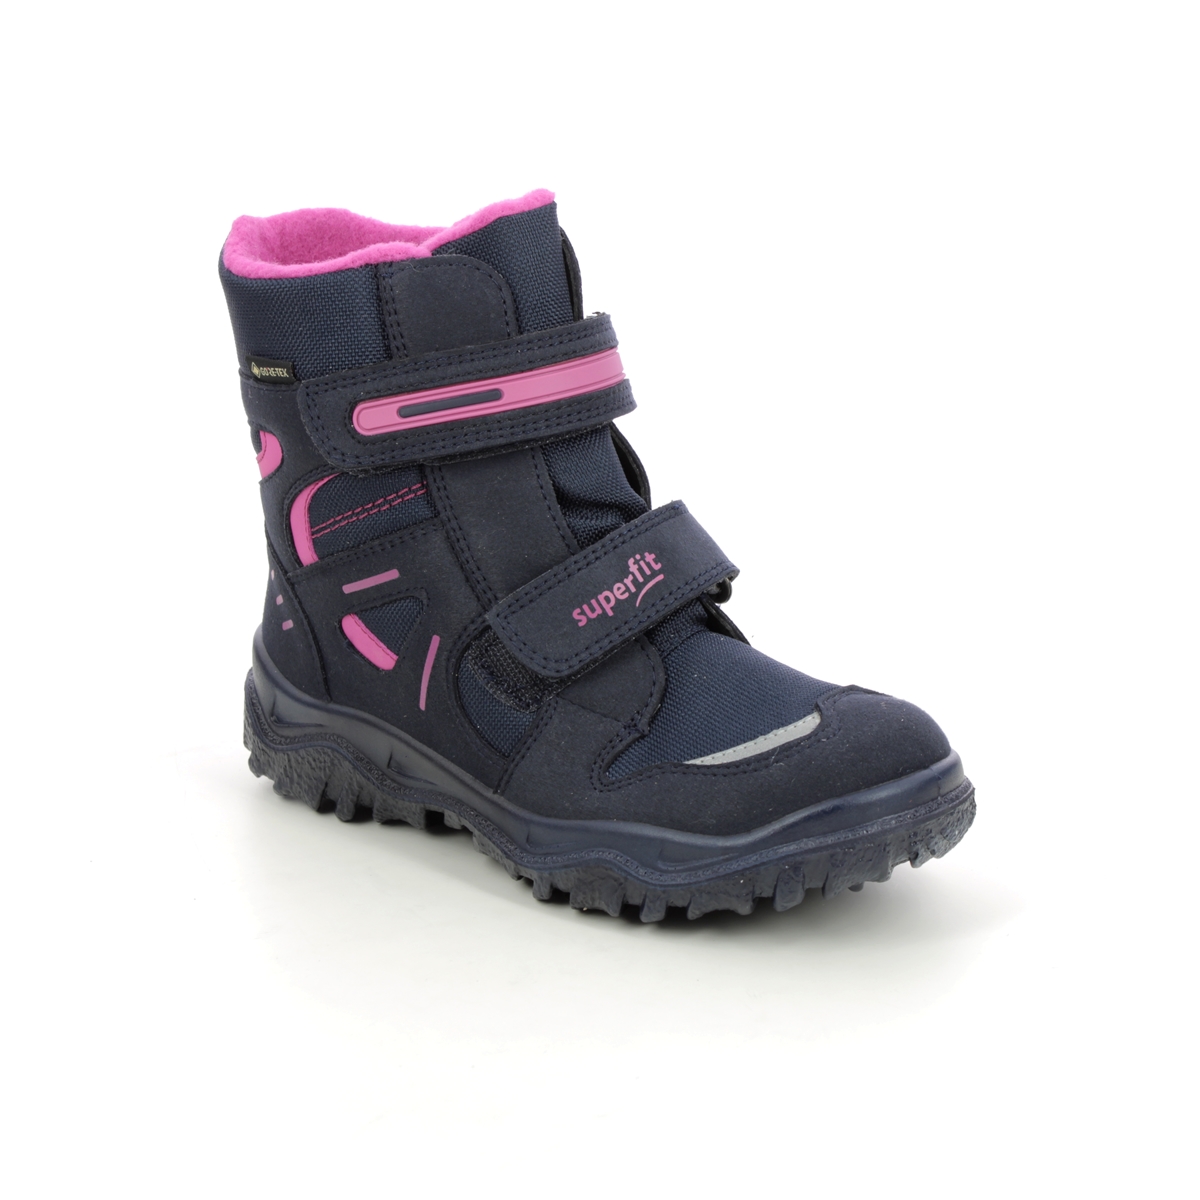 Superfit Husky Jnr Gore Navy Pink Kids Girls Boots 1809080-8020 In Size 31 In Plain Navy Pink For kids